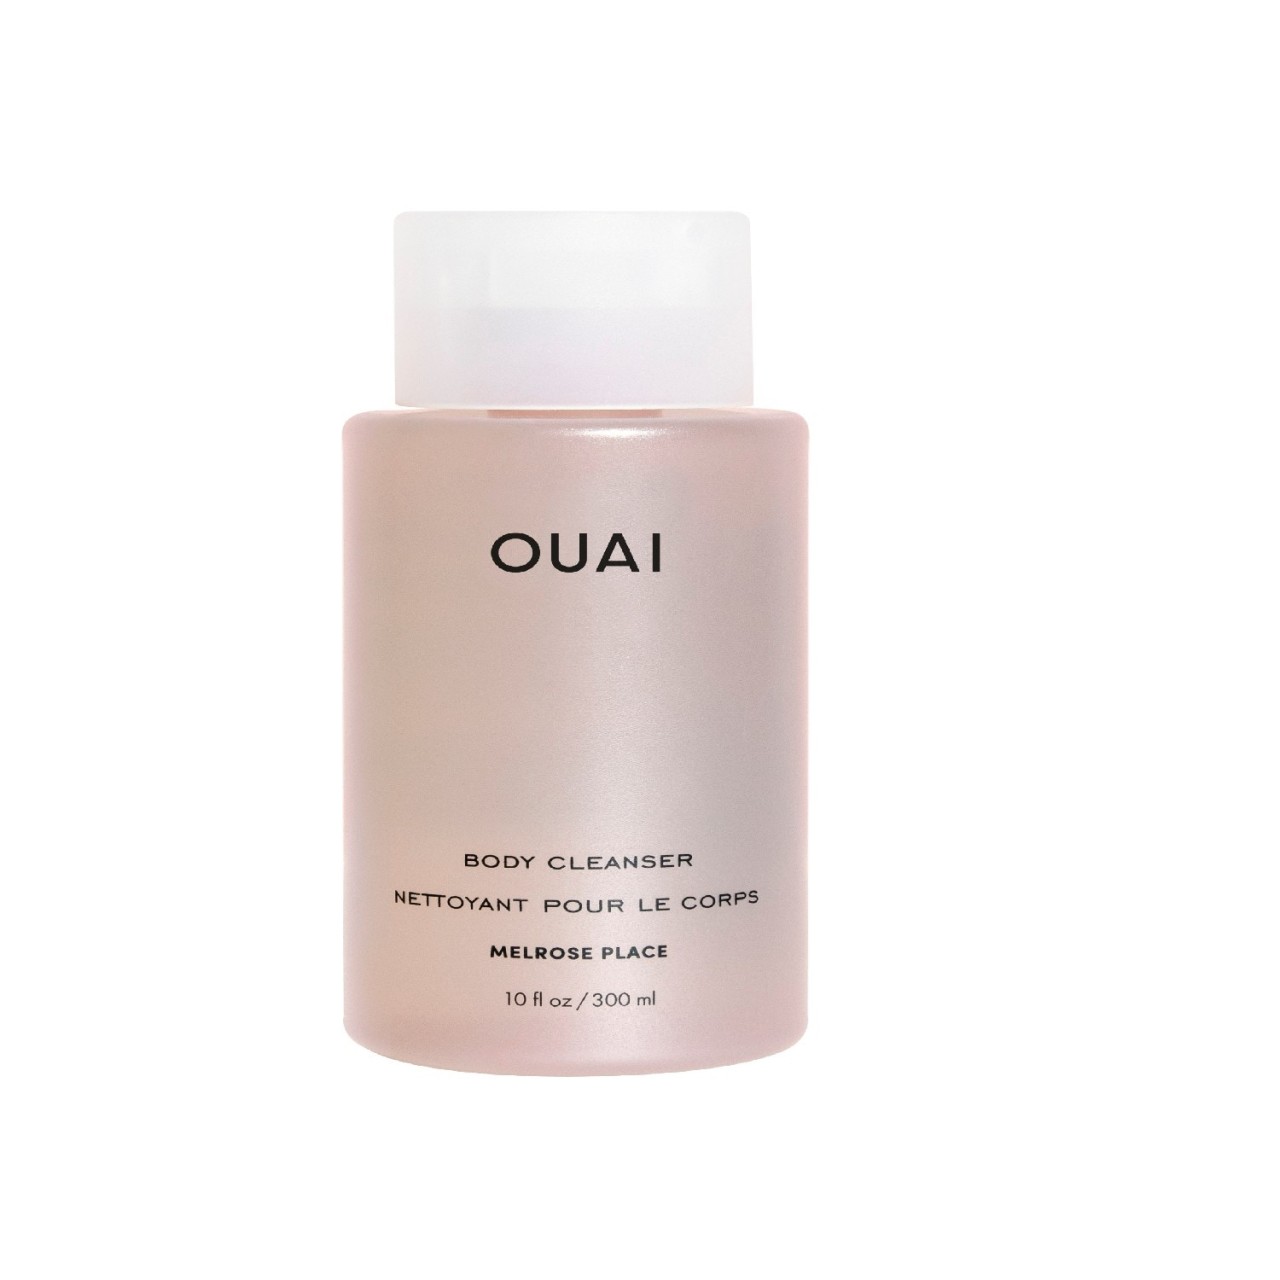 OUAI - Body Cleanser Melrose Place - 